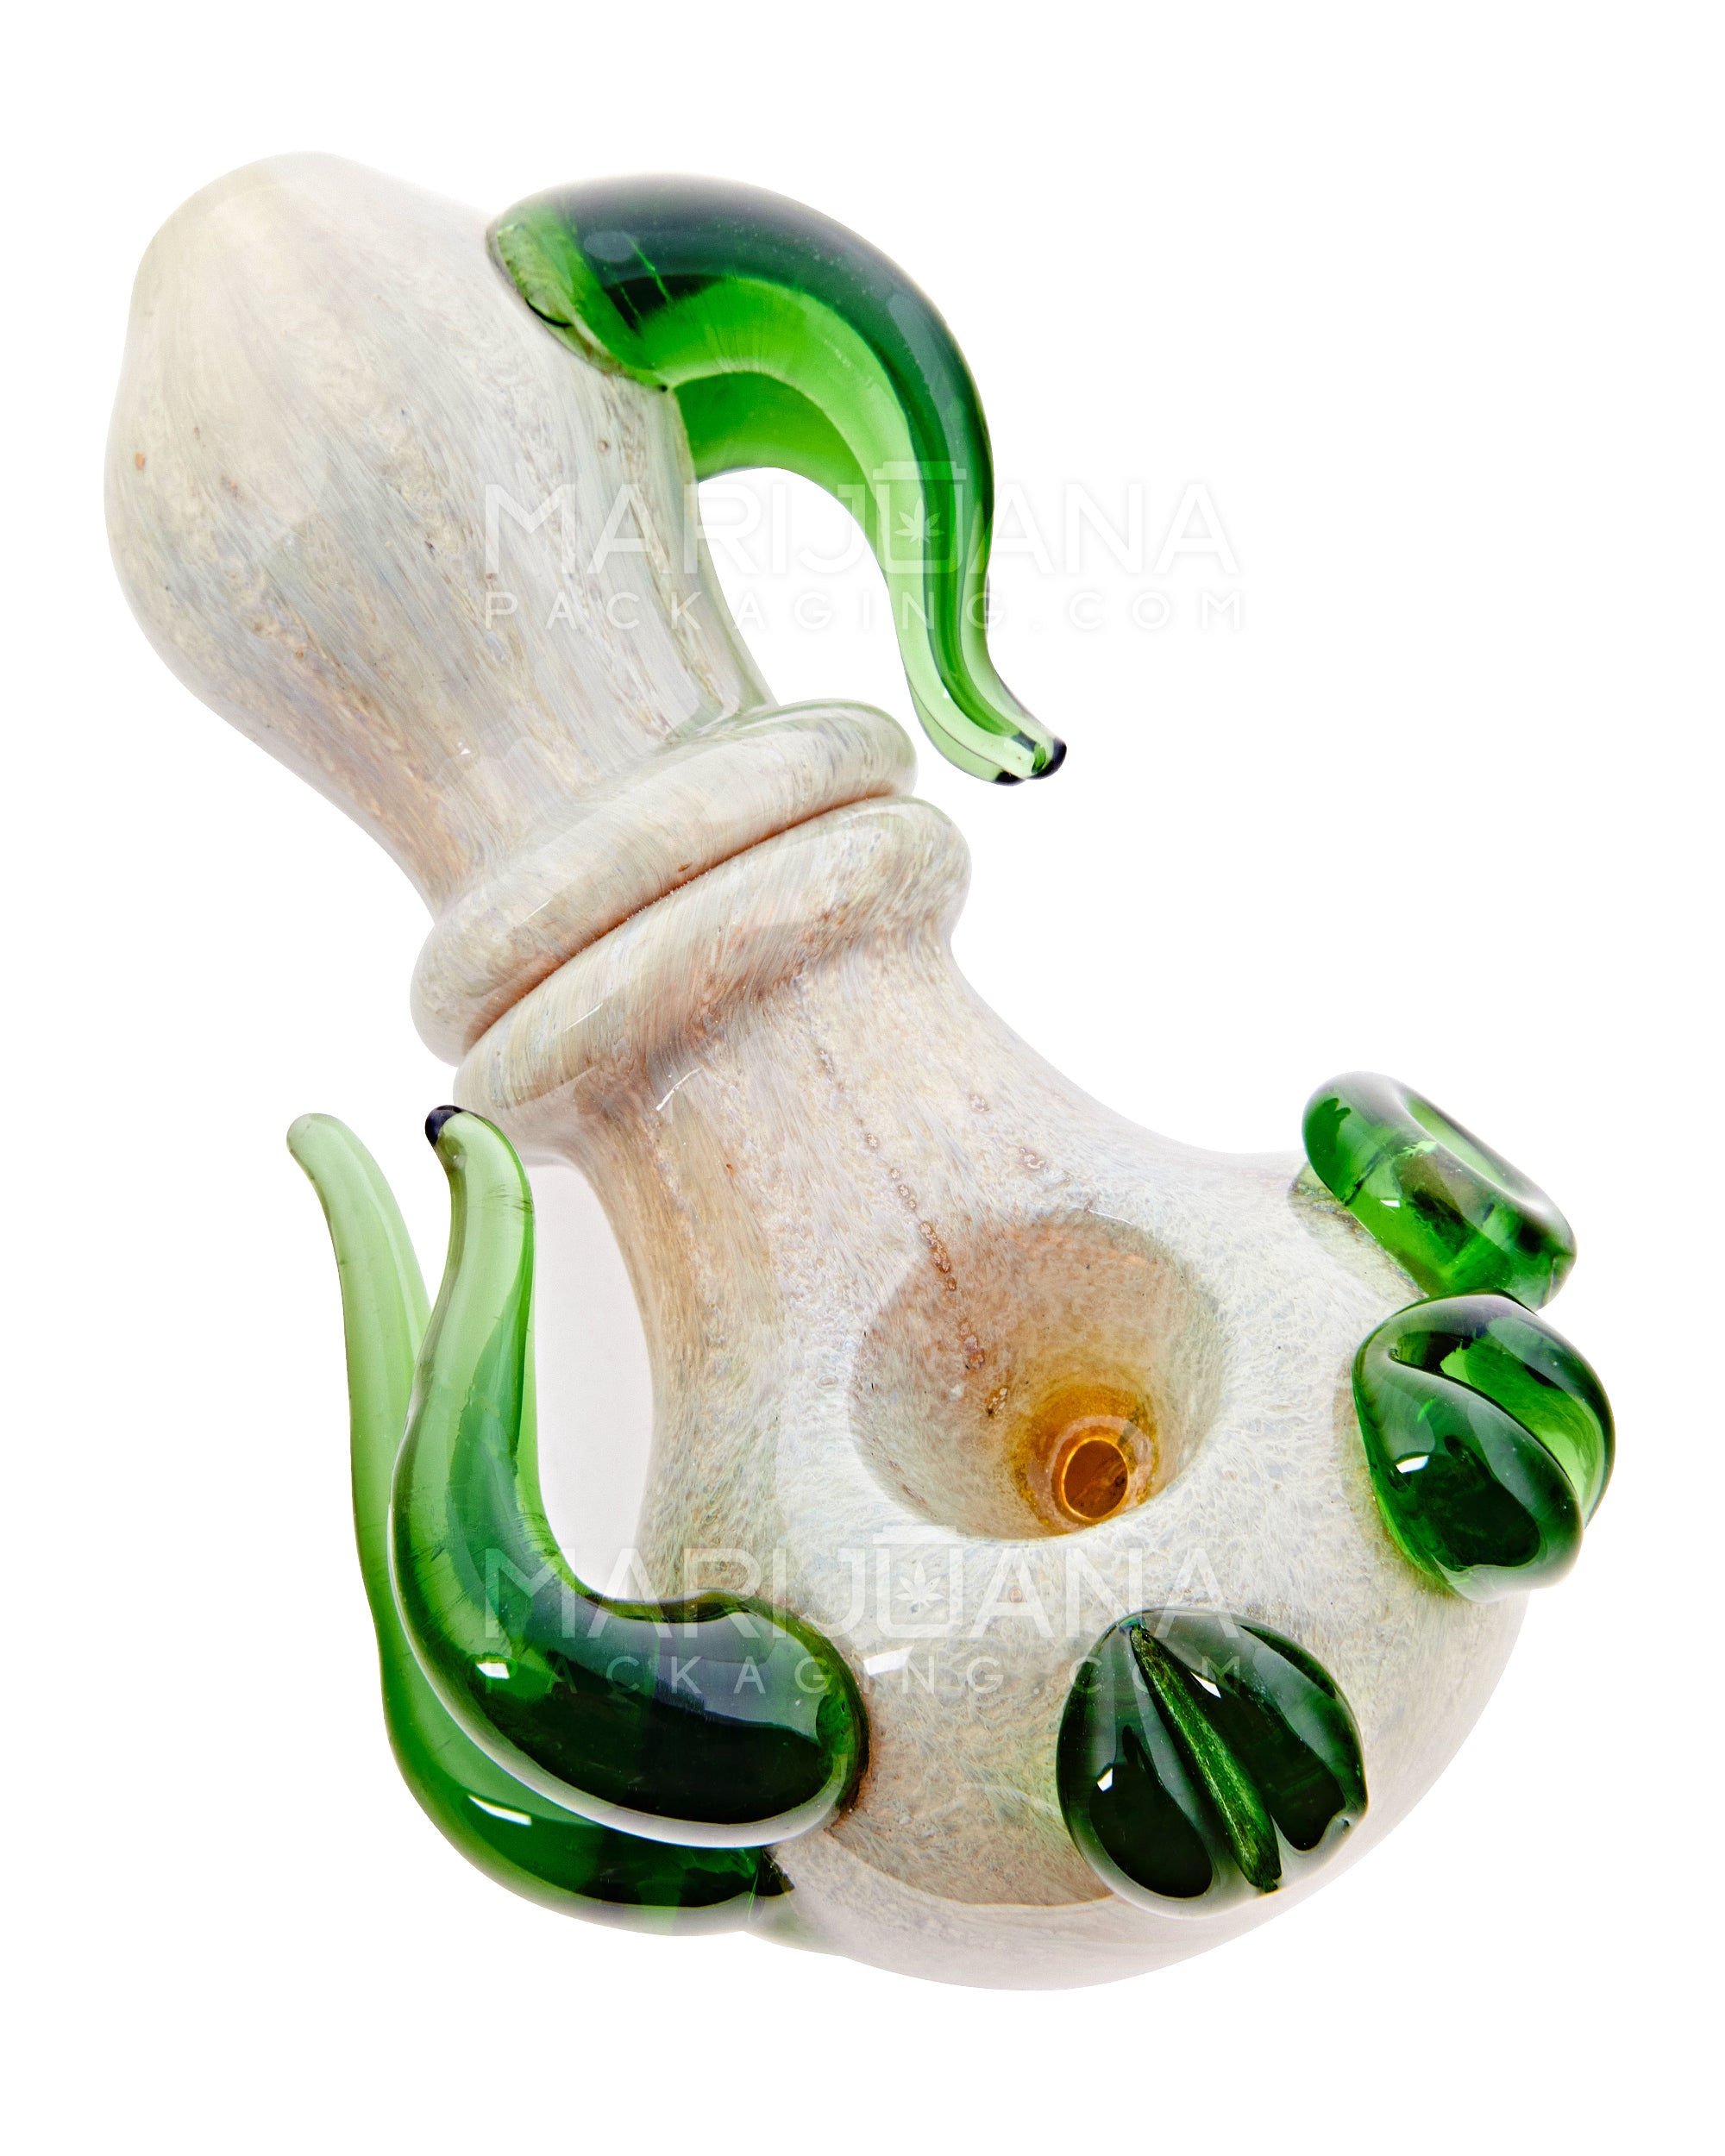 Frit Stone Spoon Hand Pipe w/ Multi Horn Accents | 4.5in Long - Glass - Assorted